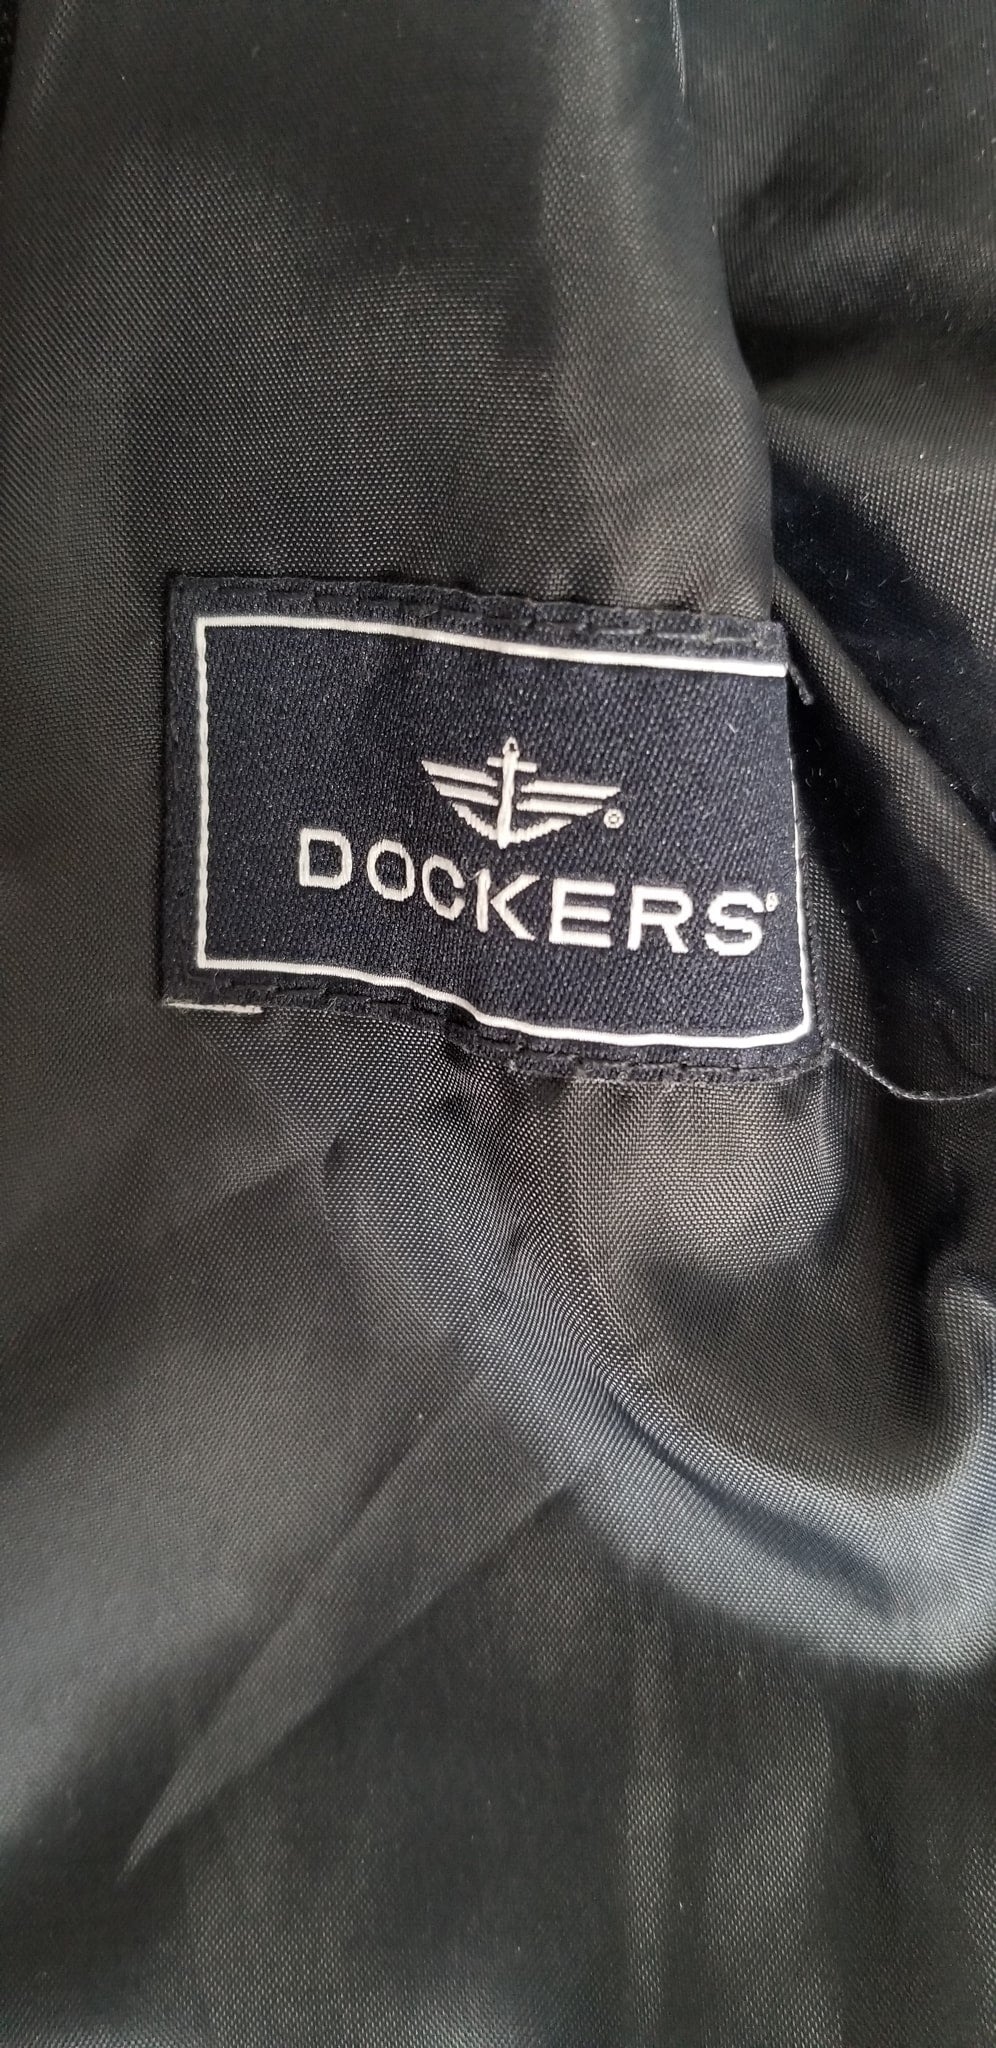 Dockers Kid's Jacket - Navy Pinstripe - Youth 12 Months